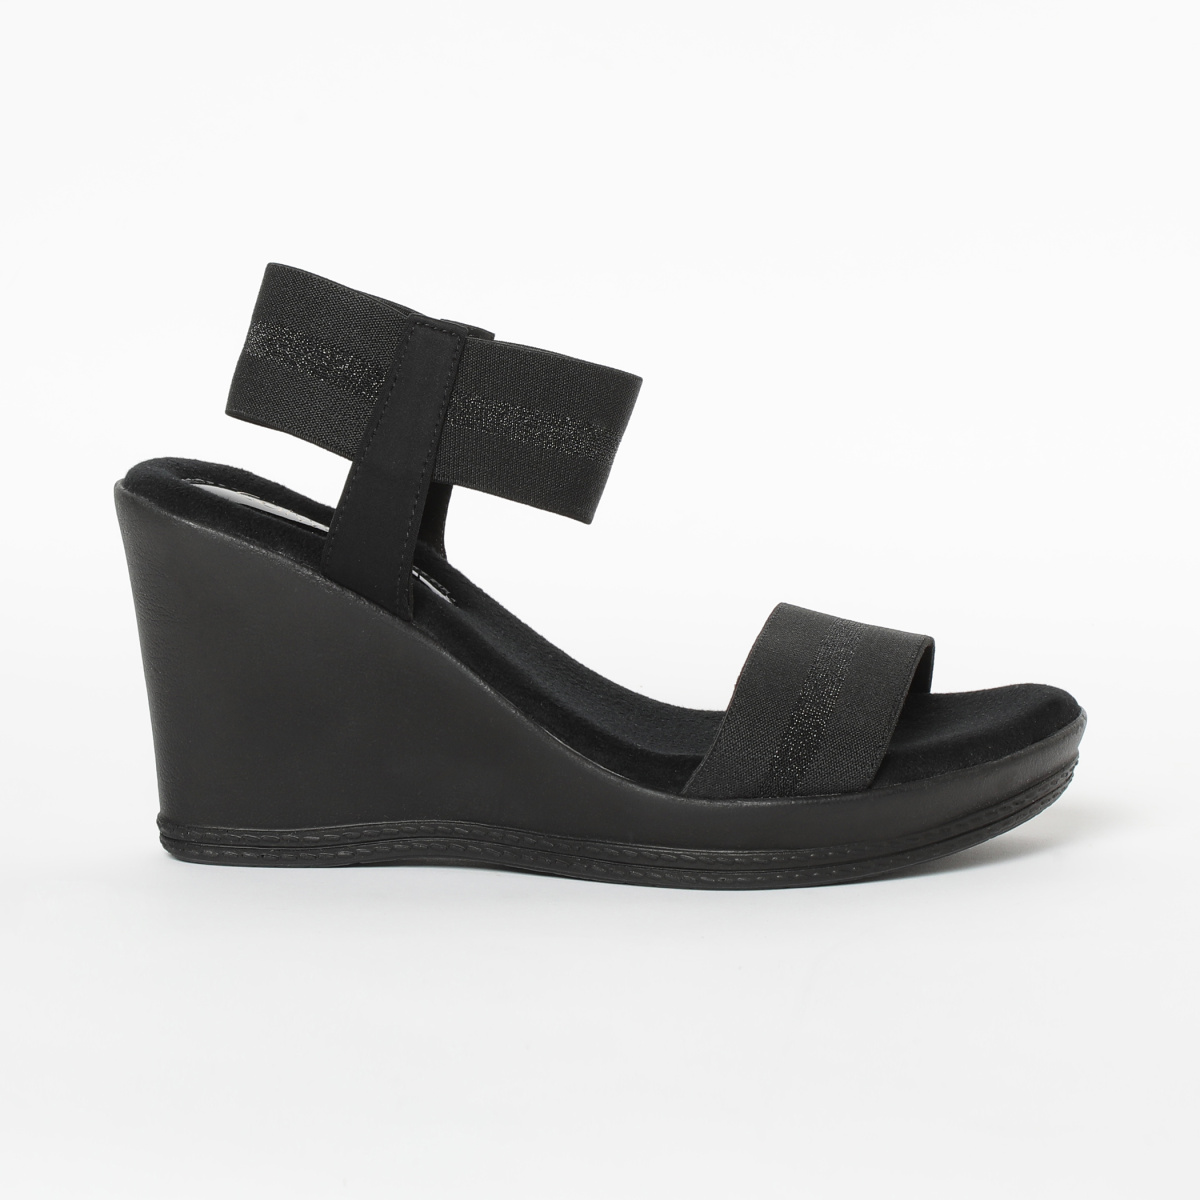 CATWALK Ankle-Strap Platforms with Wedged Heels